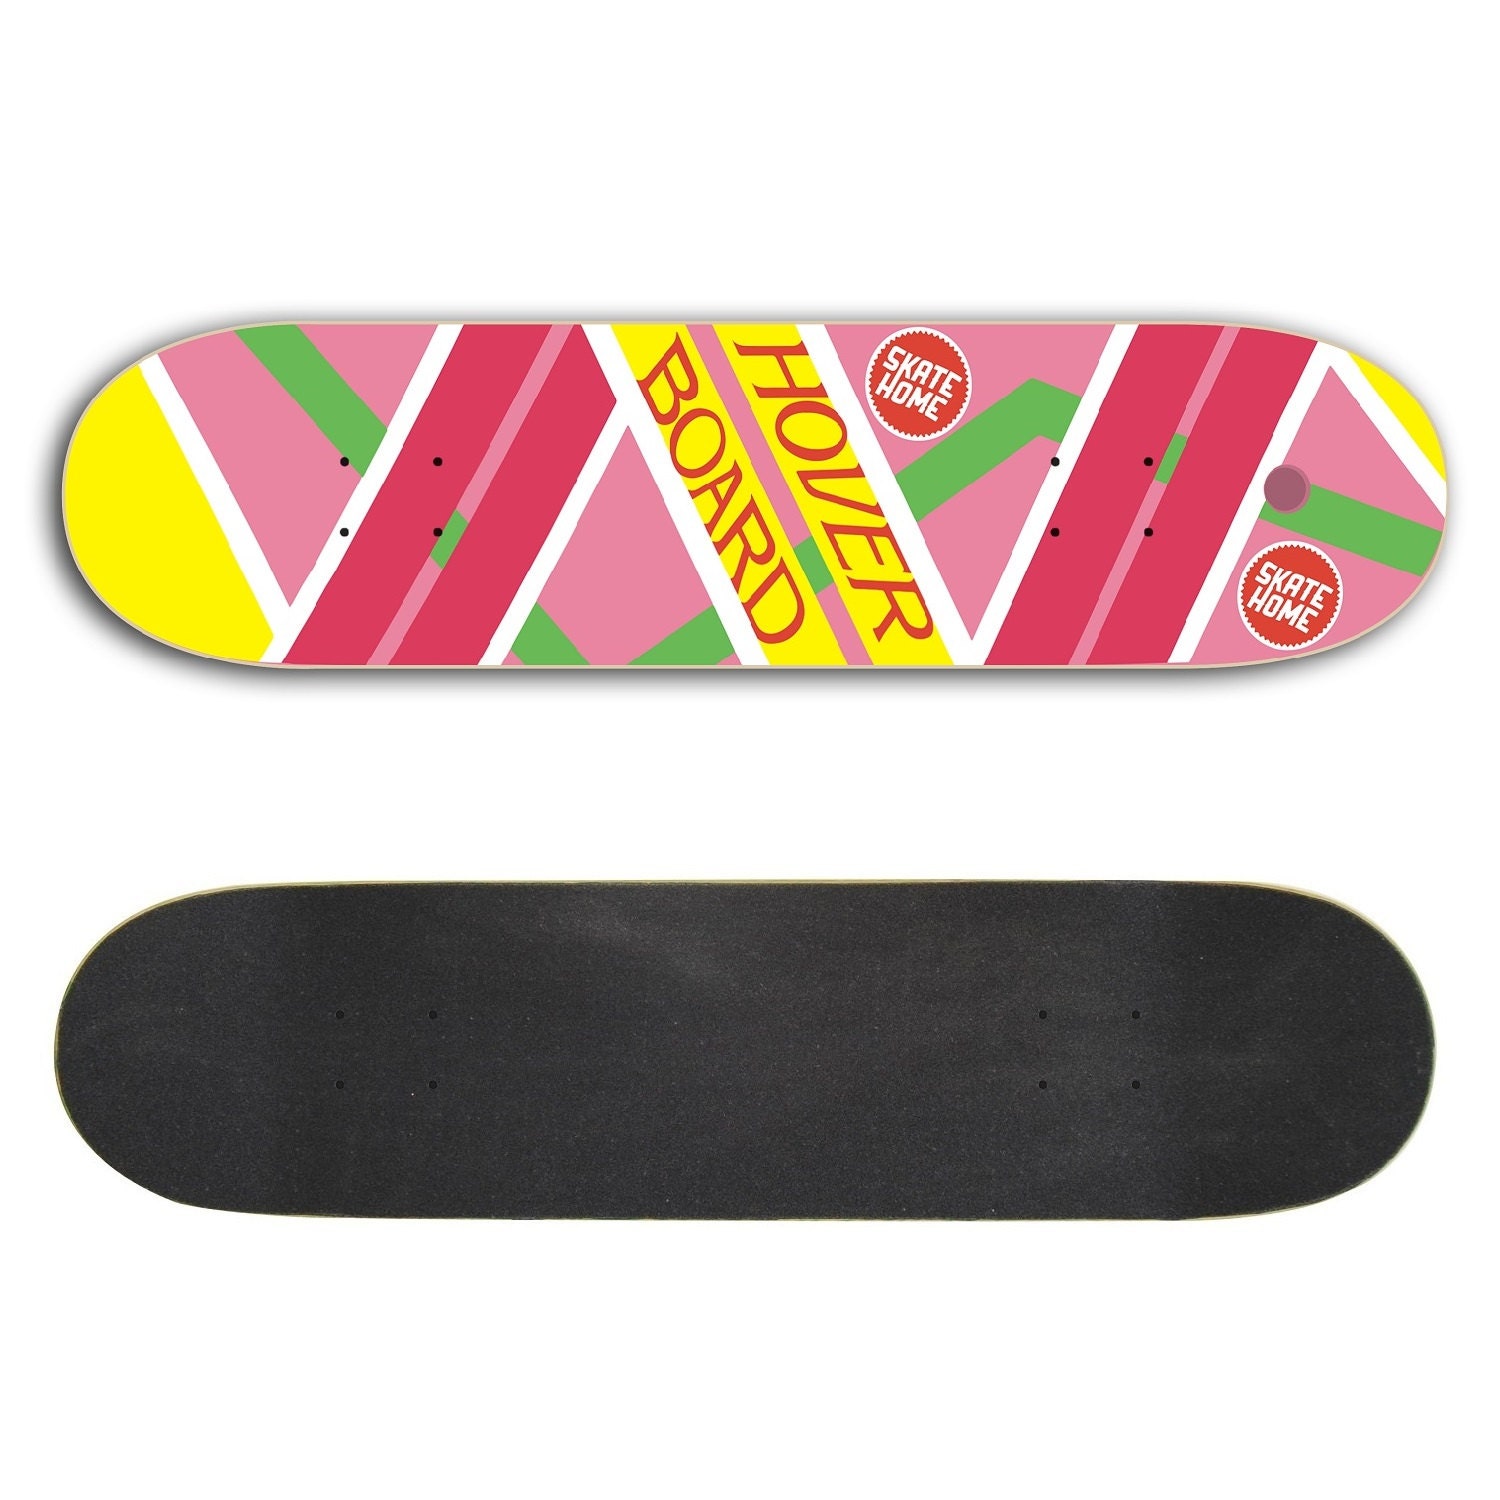 Skateboard and Free Griptape - Hoverboard Back To The Future